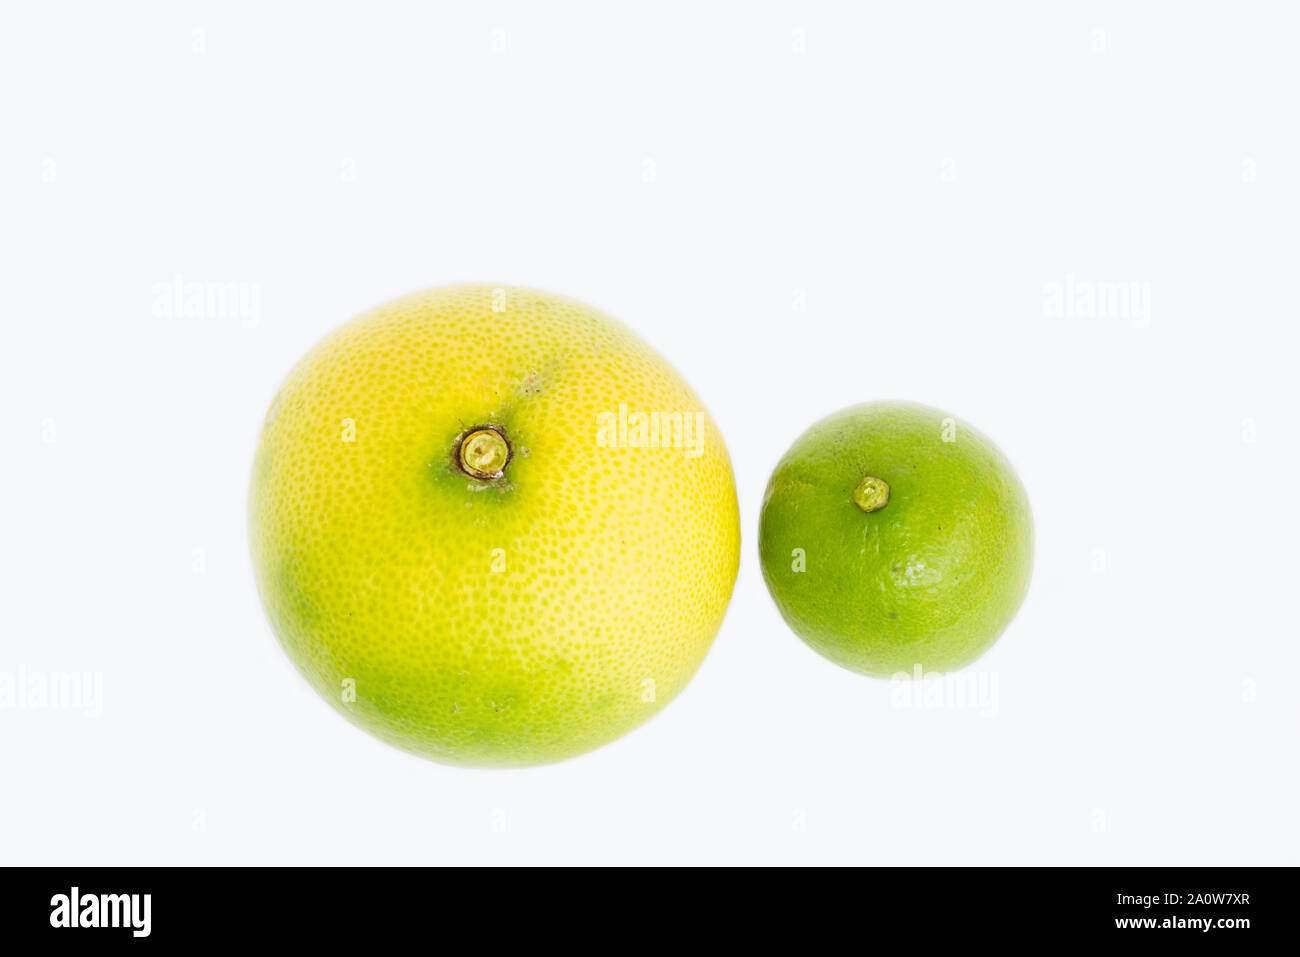 Compare different variety and size of the lemon, lime, local citrus plant fruit white the white background. Stock Photo